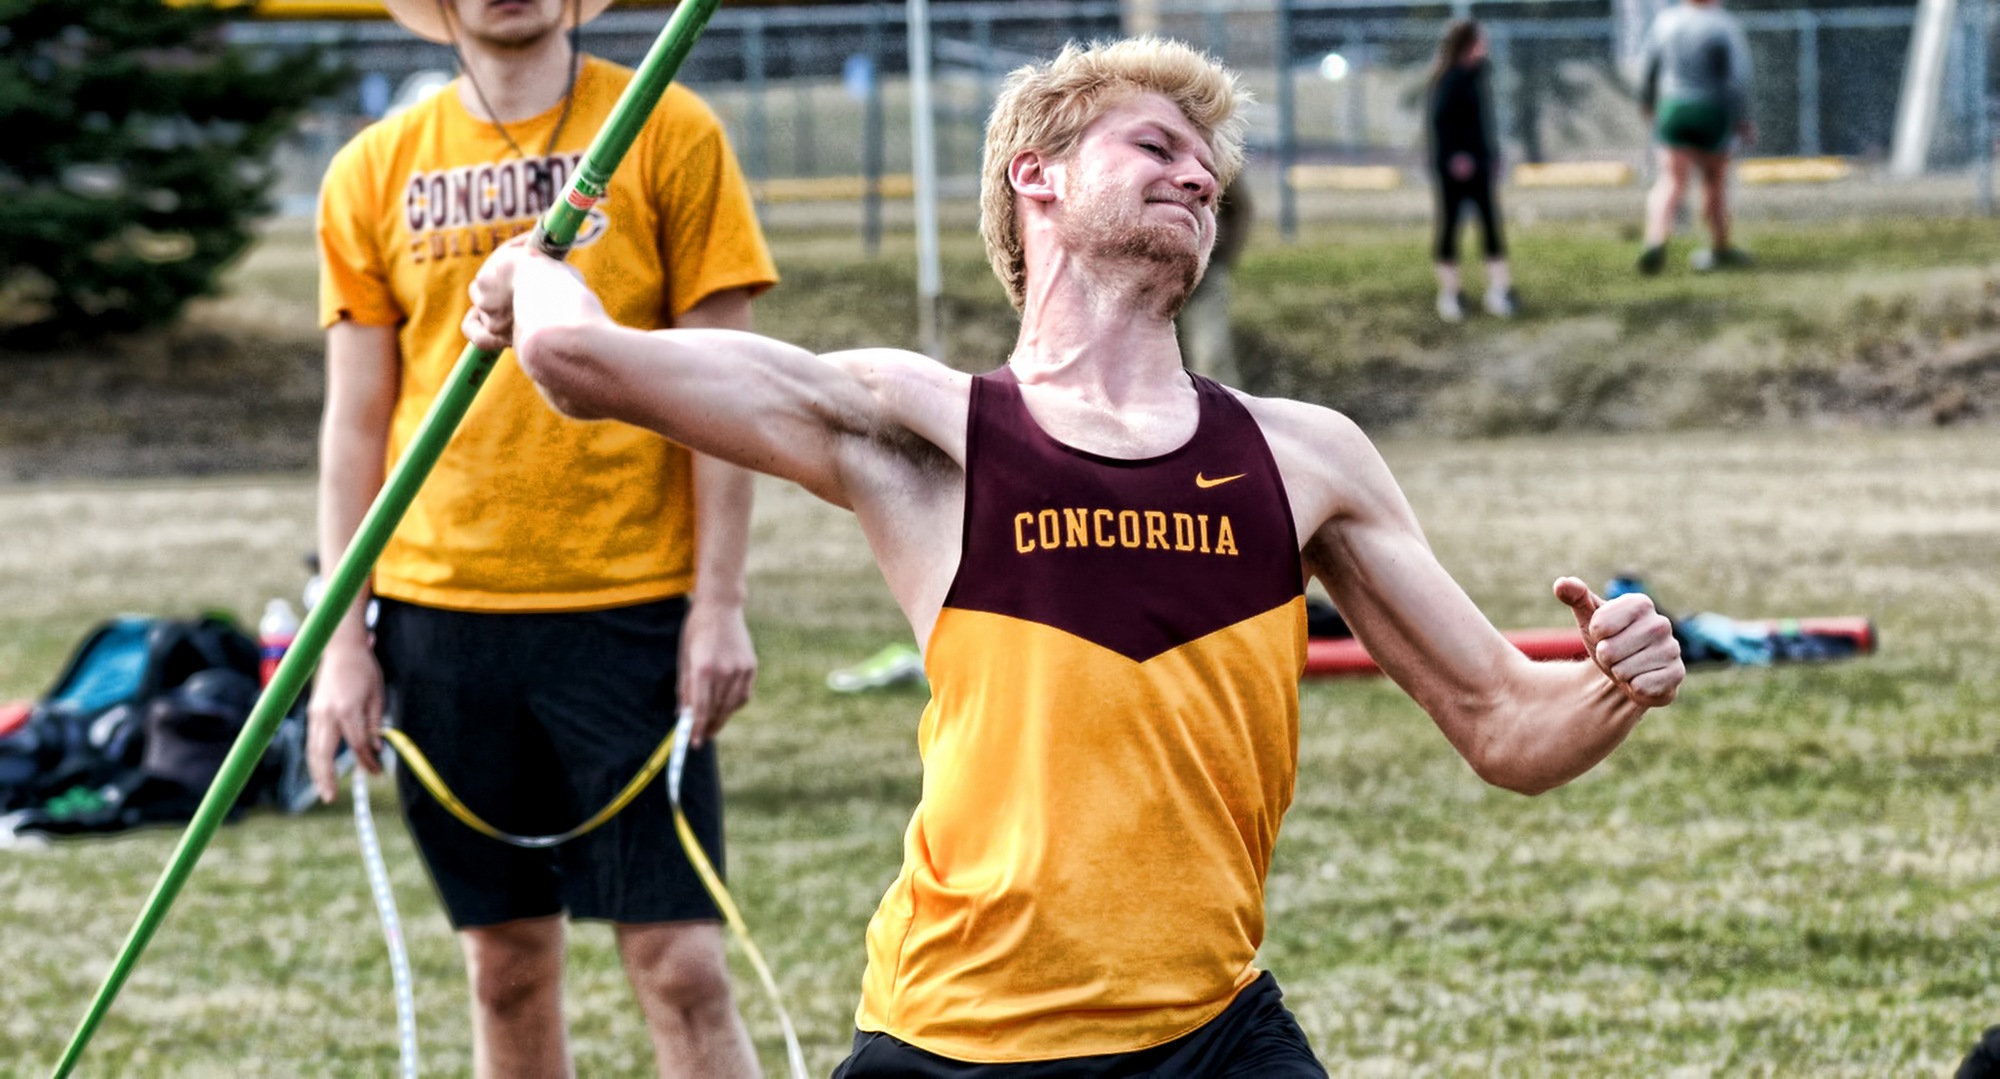 Matt Bye completed his first-ever MIAC decathlon with four personal bests and finished second to earn All-Conference honors.